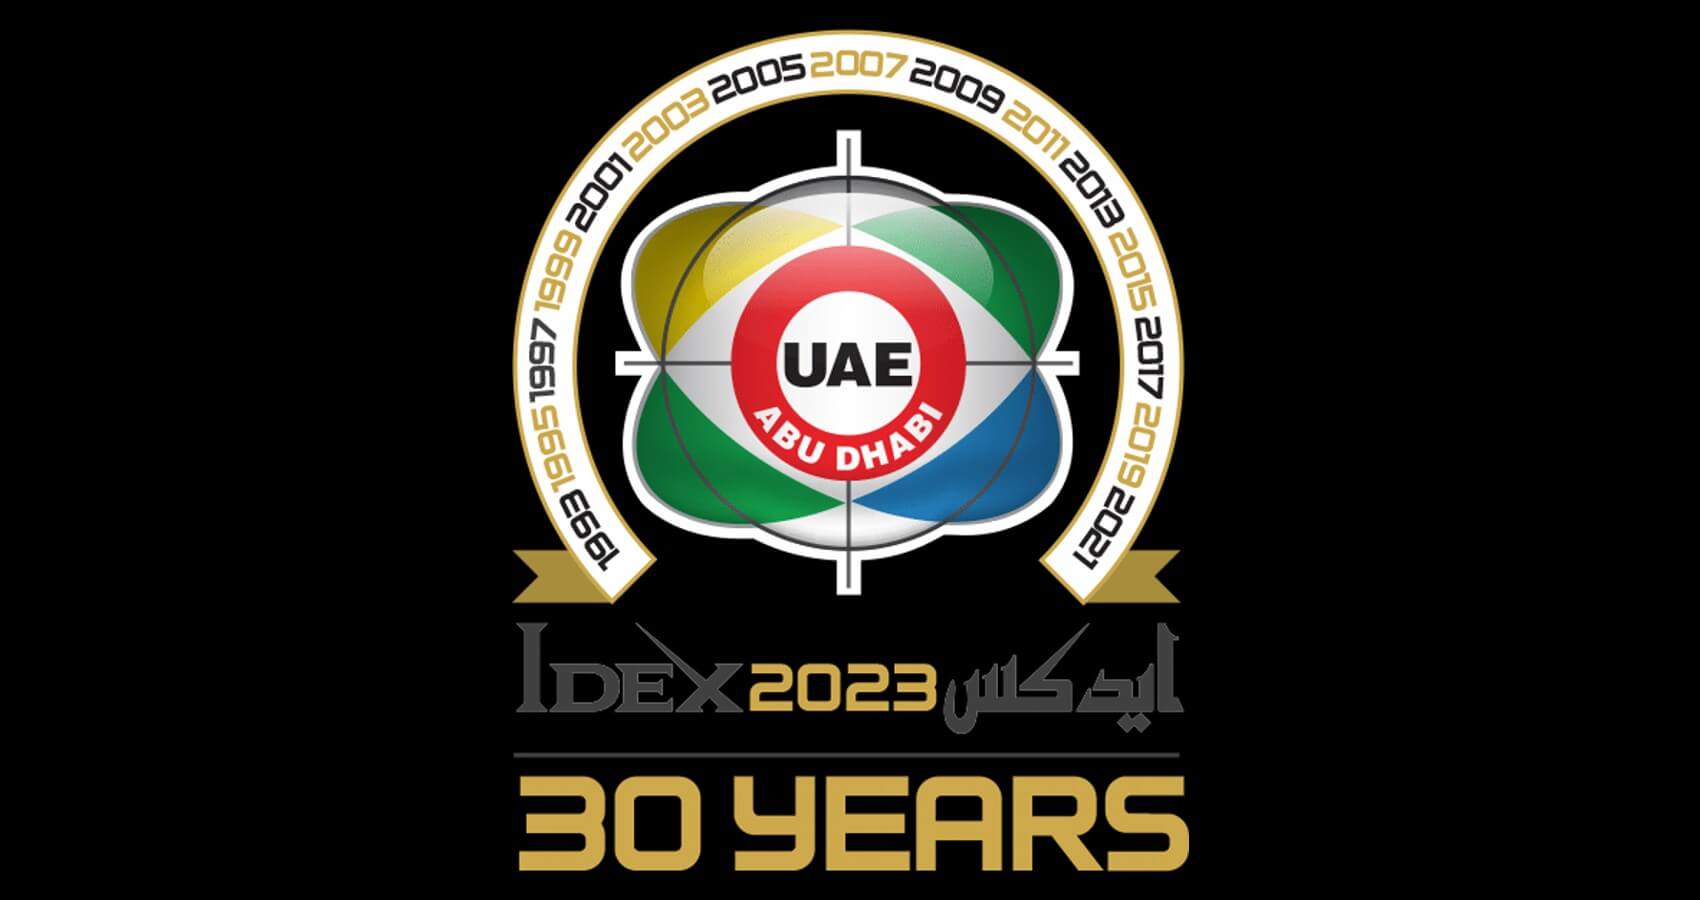 Meet Us at the Largest Defense Conference in Middle East: IDEX 2023 in Abu Dhabi